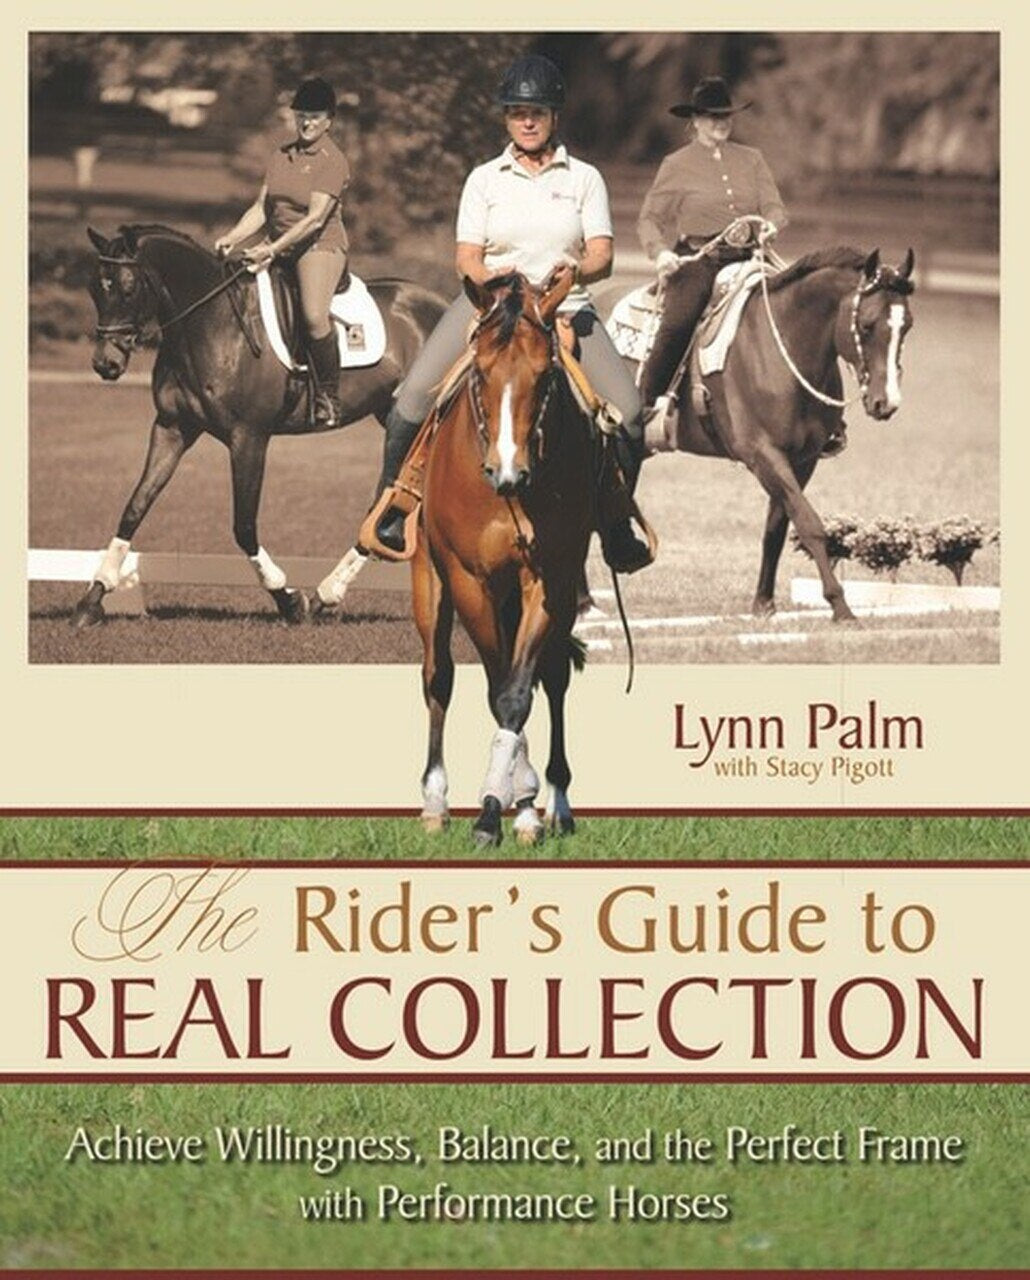 The Rider's Guide to Real Collection by Lynn Palm